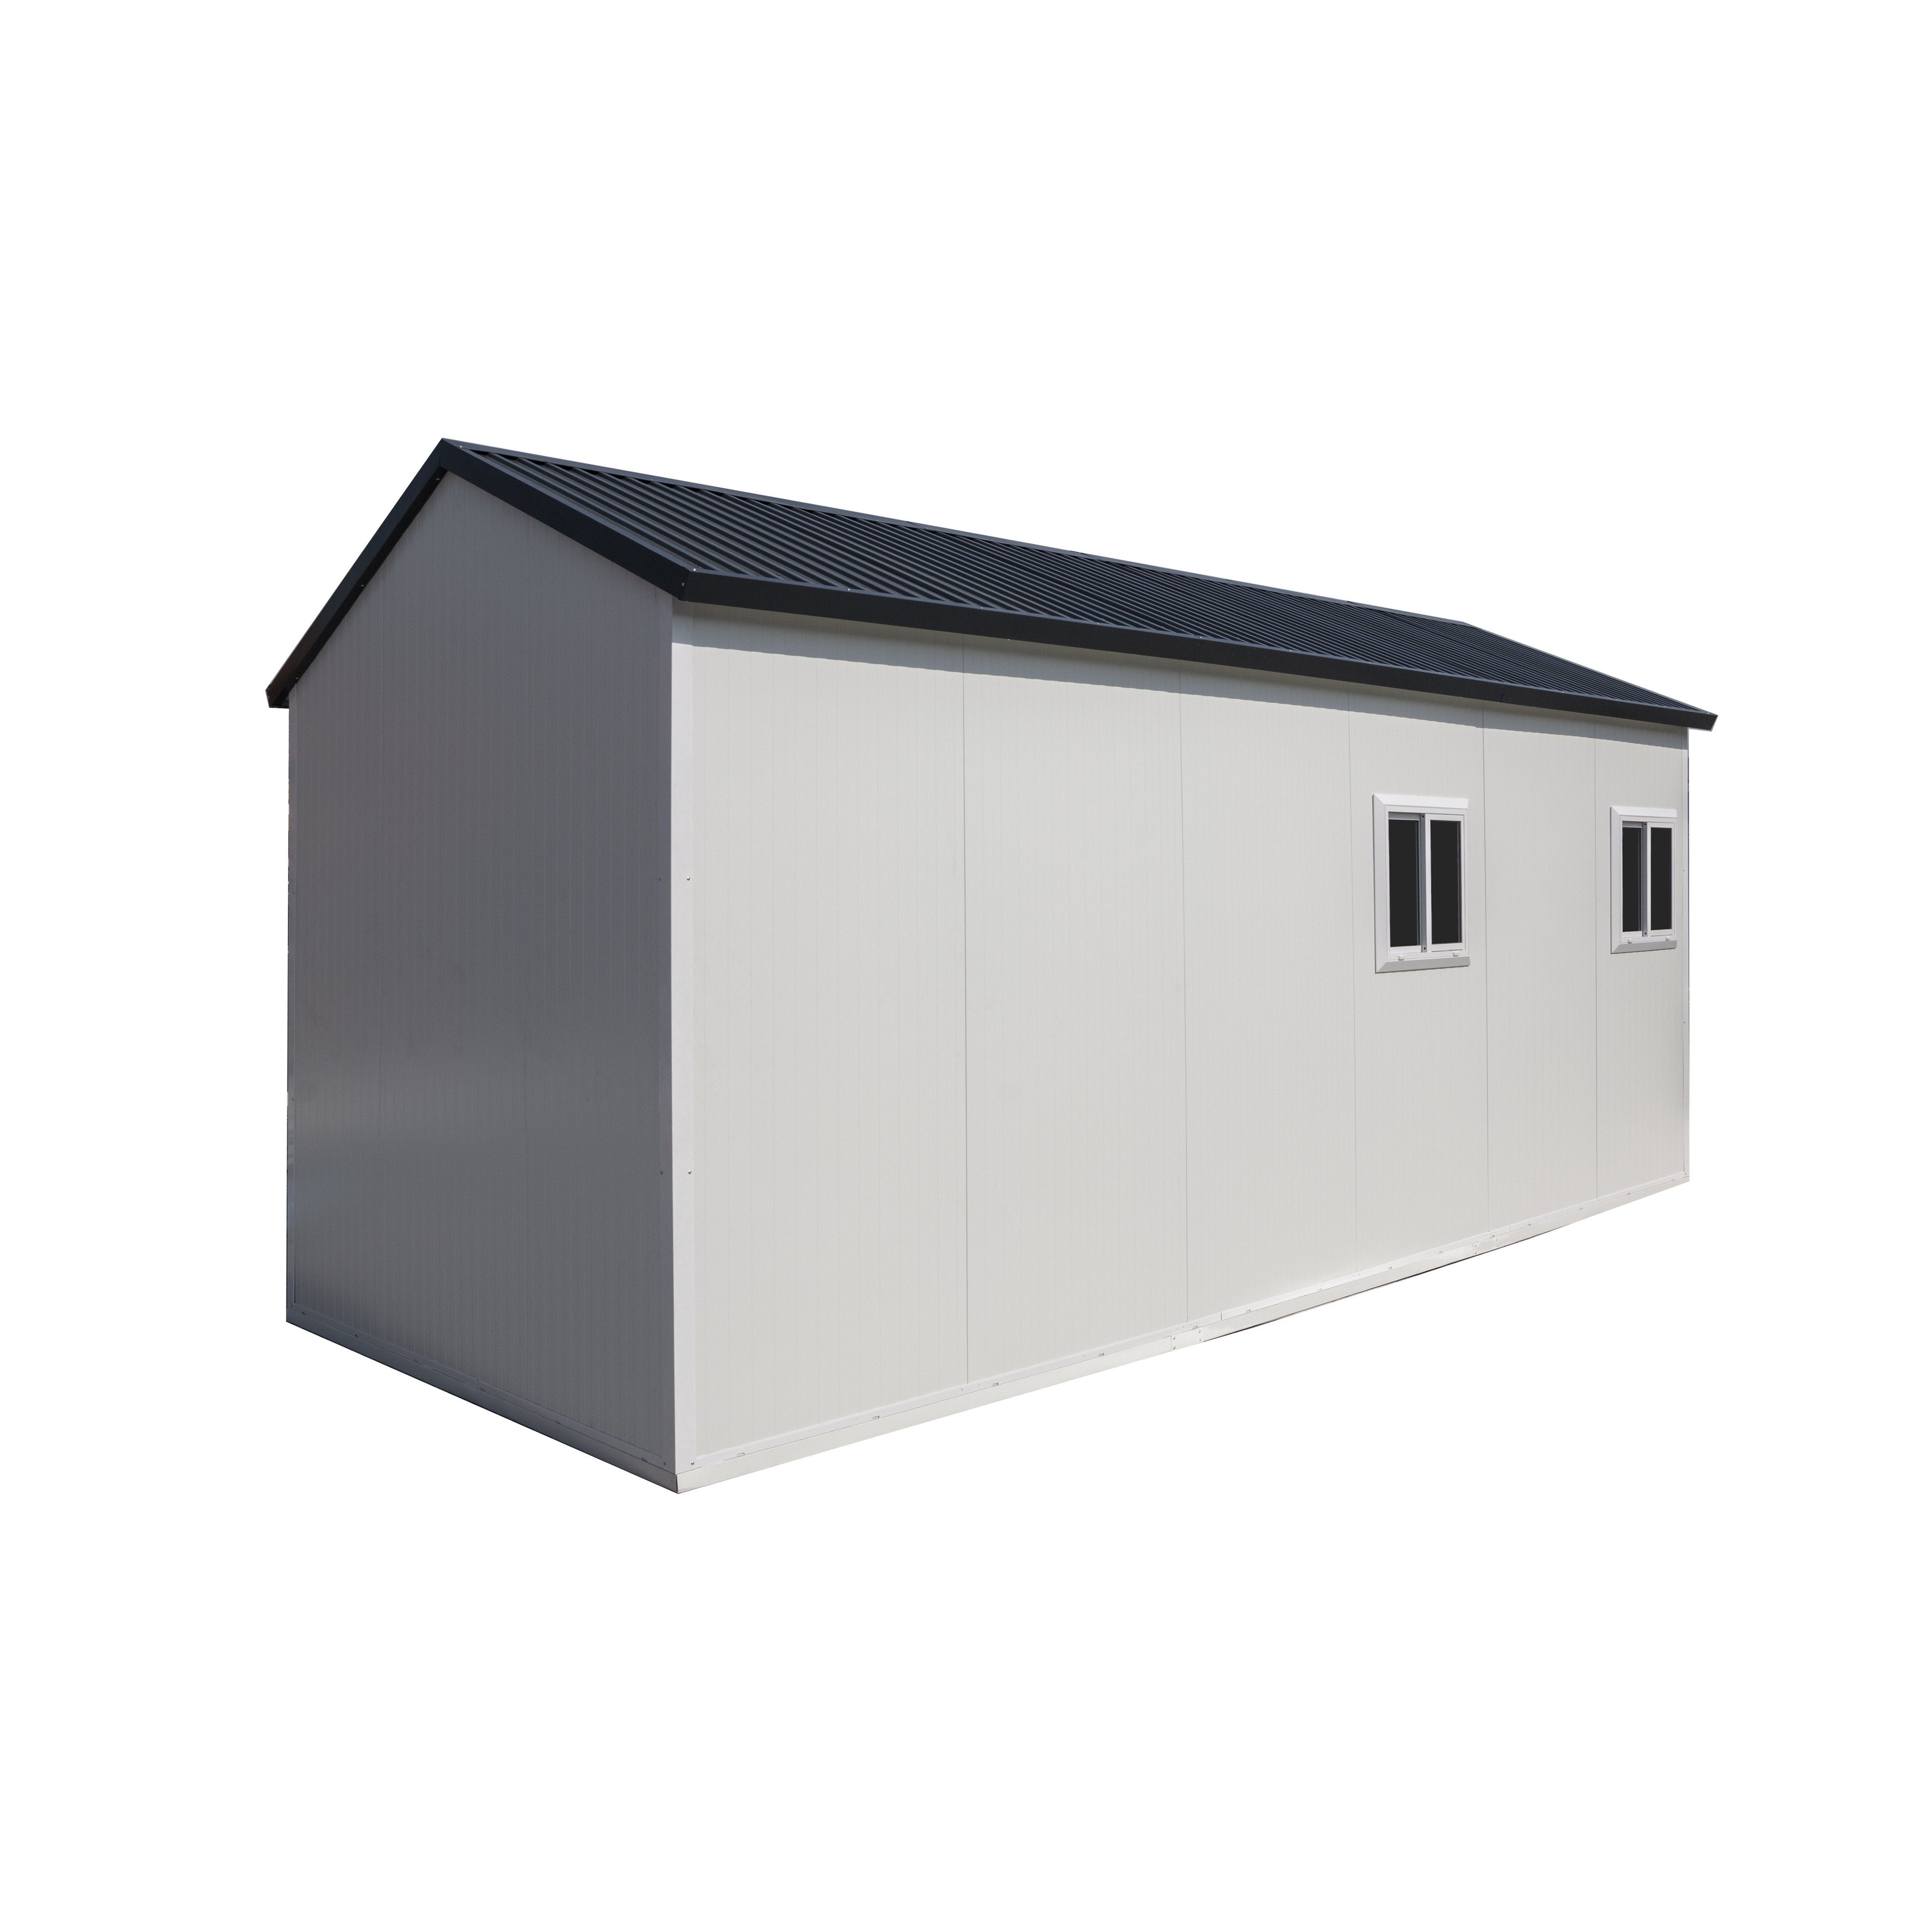 Duramax Insulated Buildings BOSS Gable Roof Tiny House/Insulated Building 8.5' x 20'